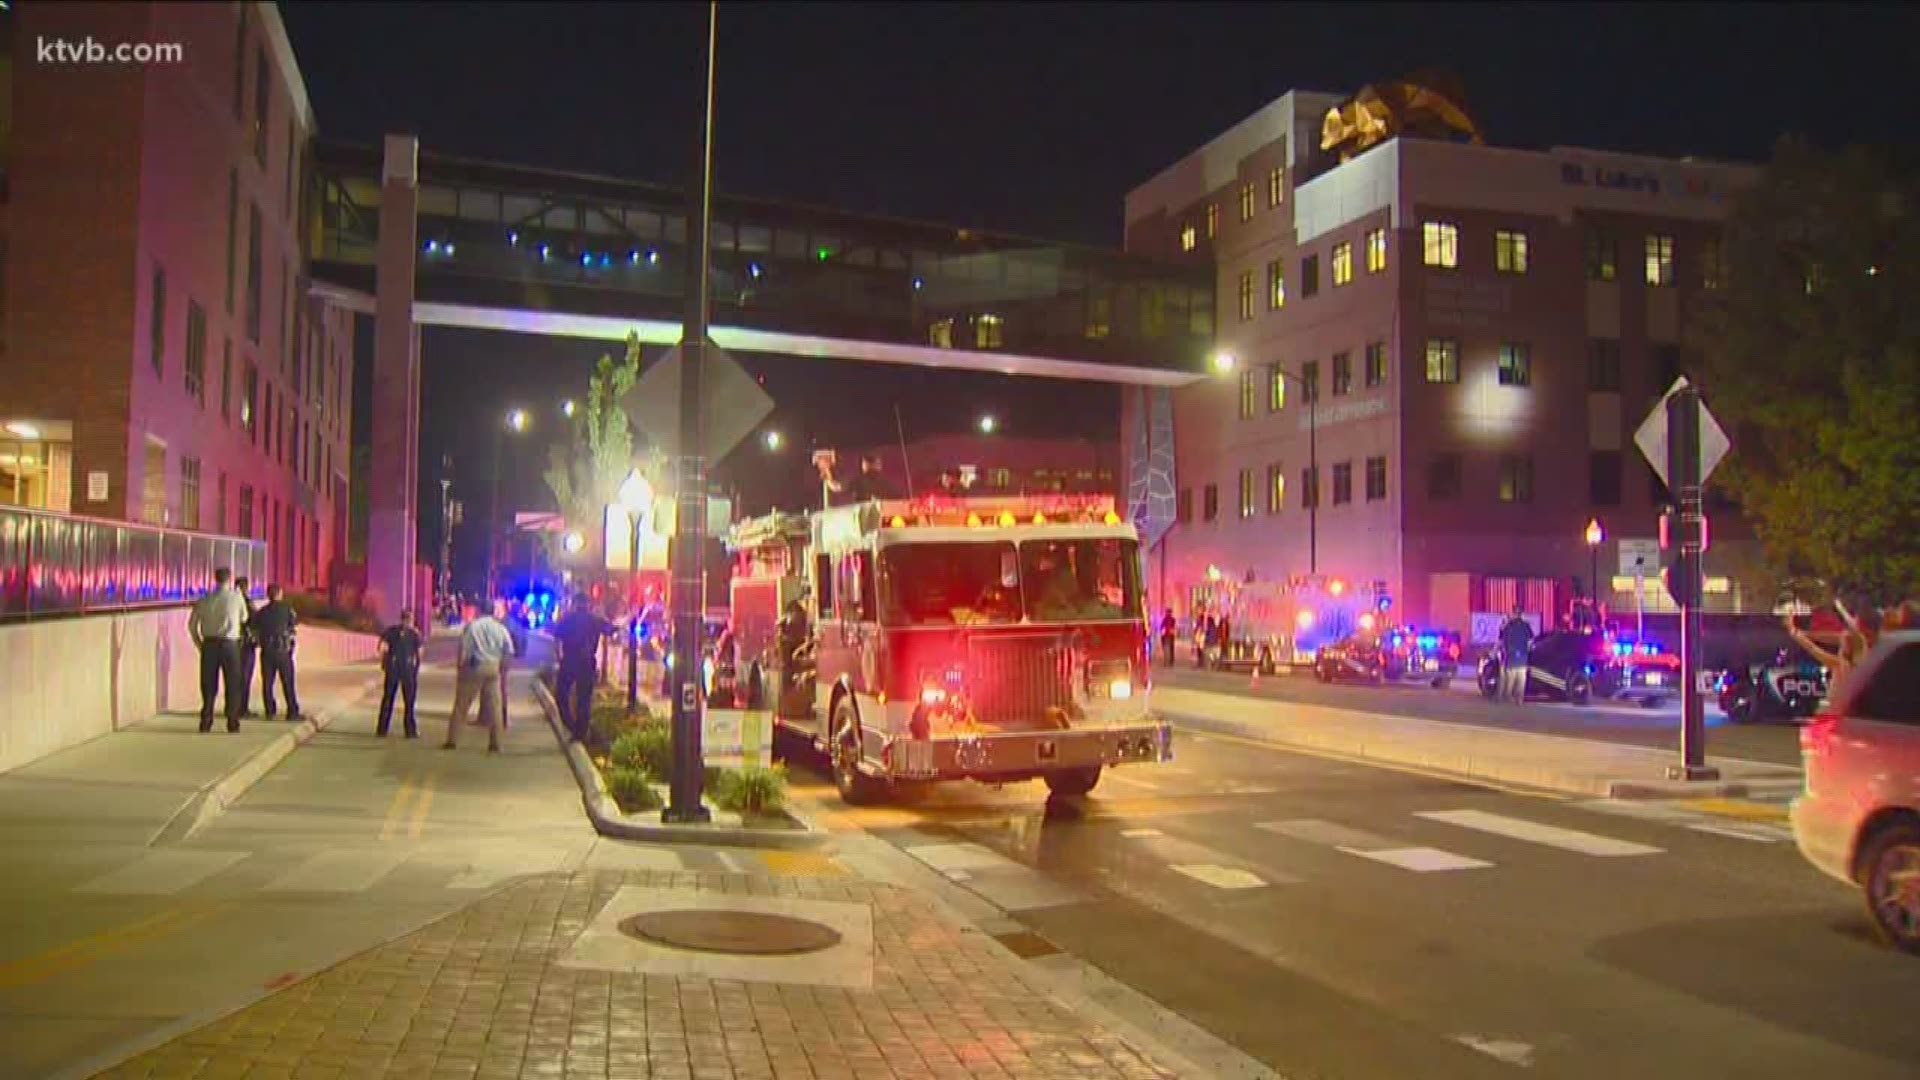 First responders from across the Treasure Valley showed up at St. Luke's hospital Tuesday night, where they flashed their lights up to the children's wing to show support for the young patients.